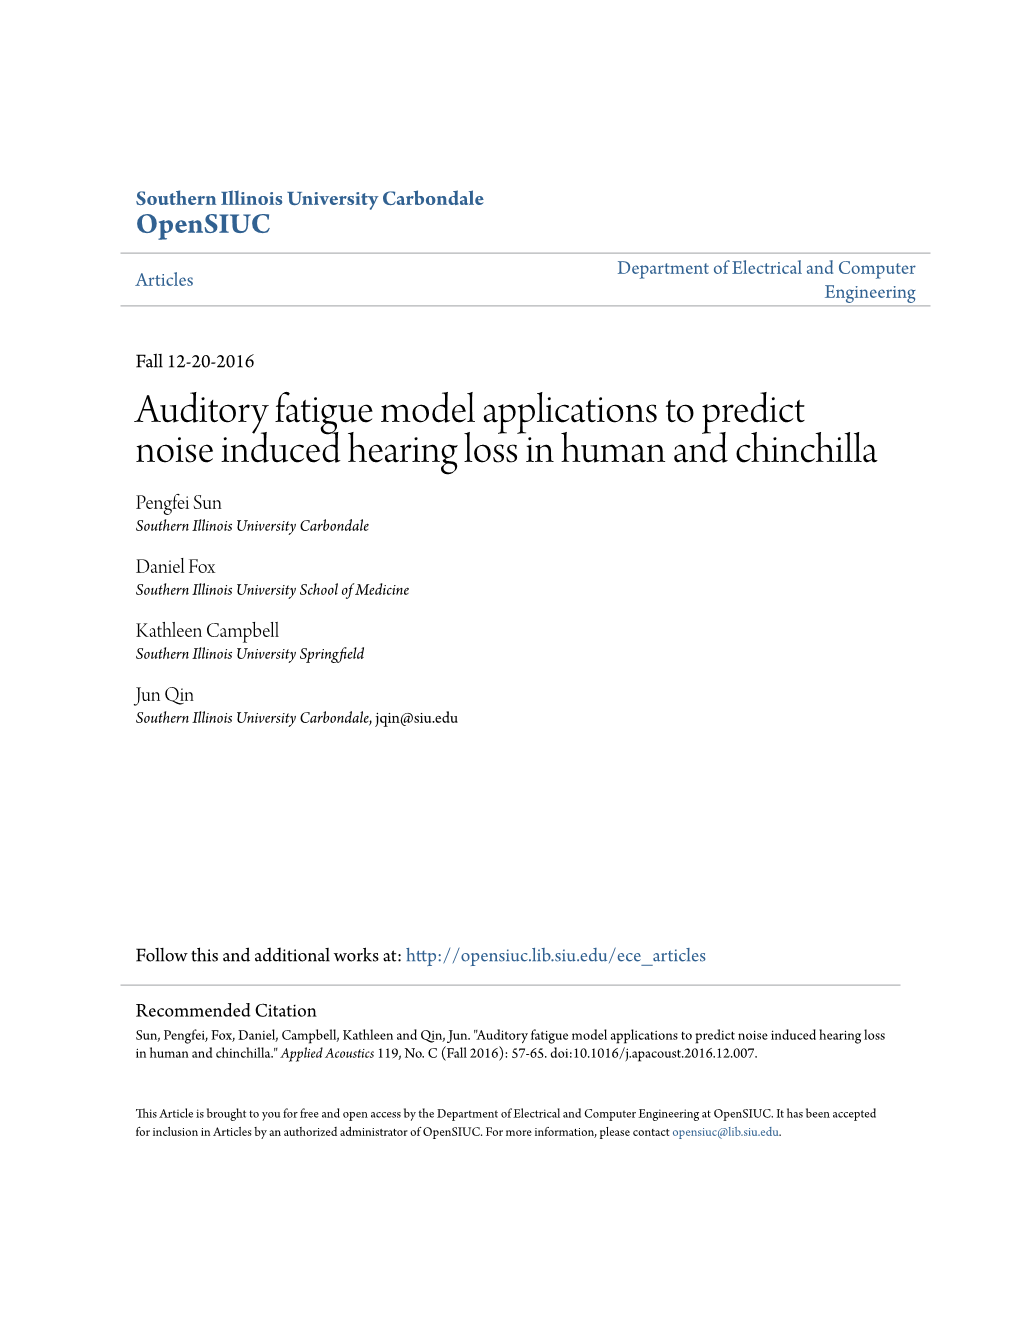 Auditory Fatigue Model Applications to Predict Noise Induced Hearing Loss in Human and Chinchilla Pengfei Sun Southern Illinois University Carbondale